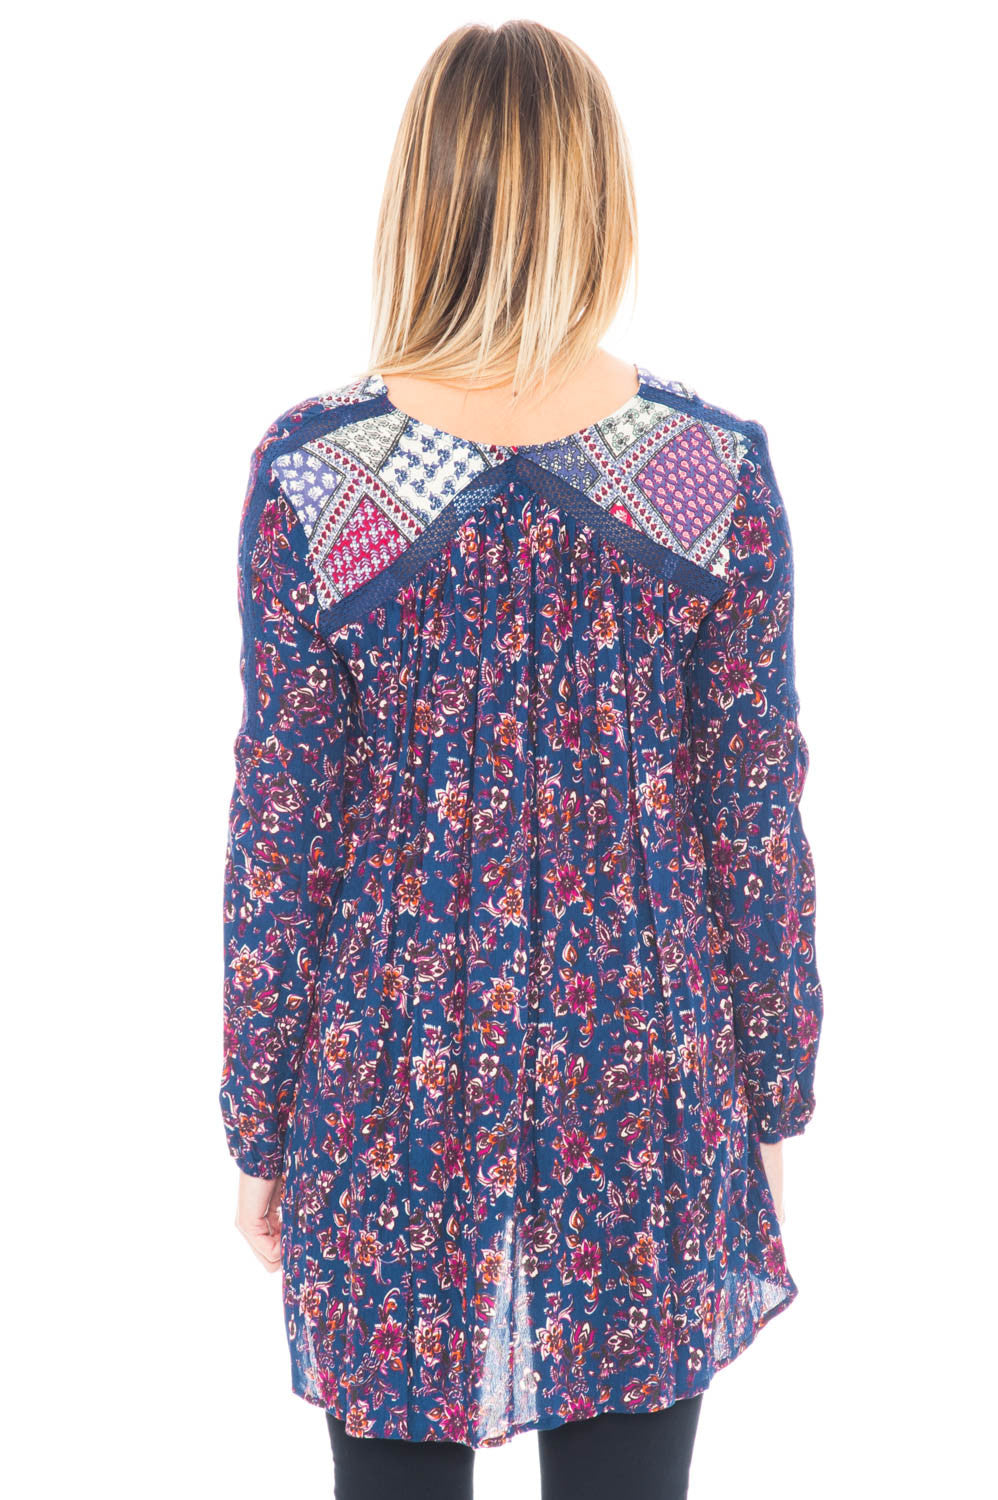 Tunic - Sheer Floral High Low Top with Pockets